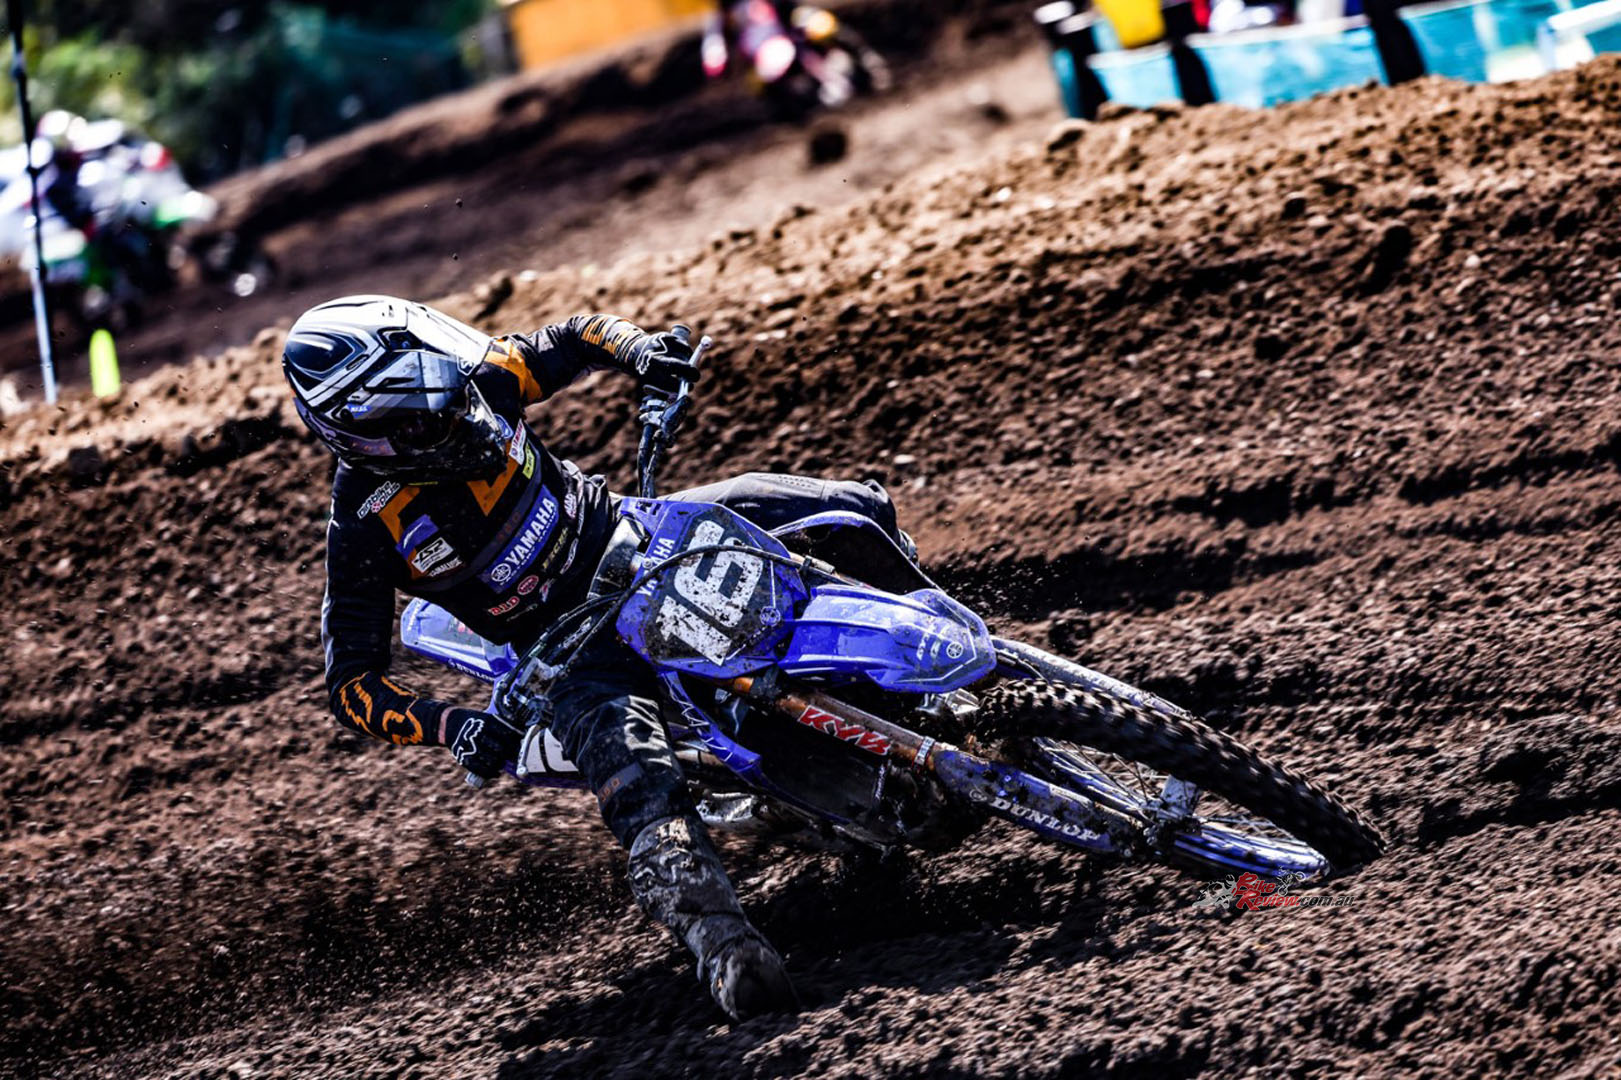 Racing a production-based Yamaha YZ250F for the Yamaha Racing Factory Team in the IA2 (250cc) class, Wilson claimed all three race wins in the triple challenge format held on the weekend.